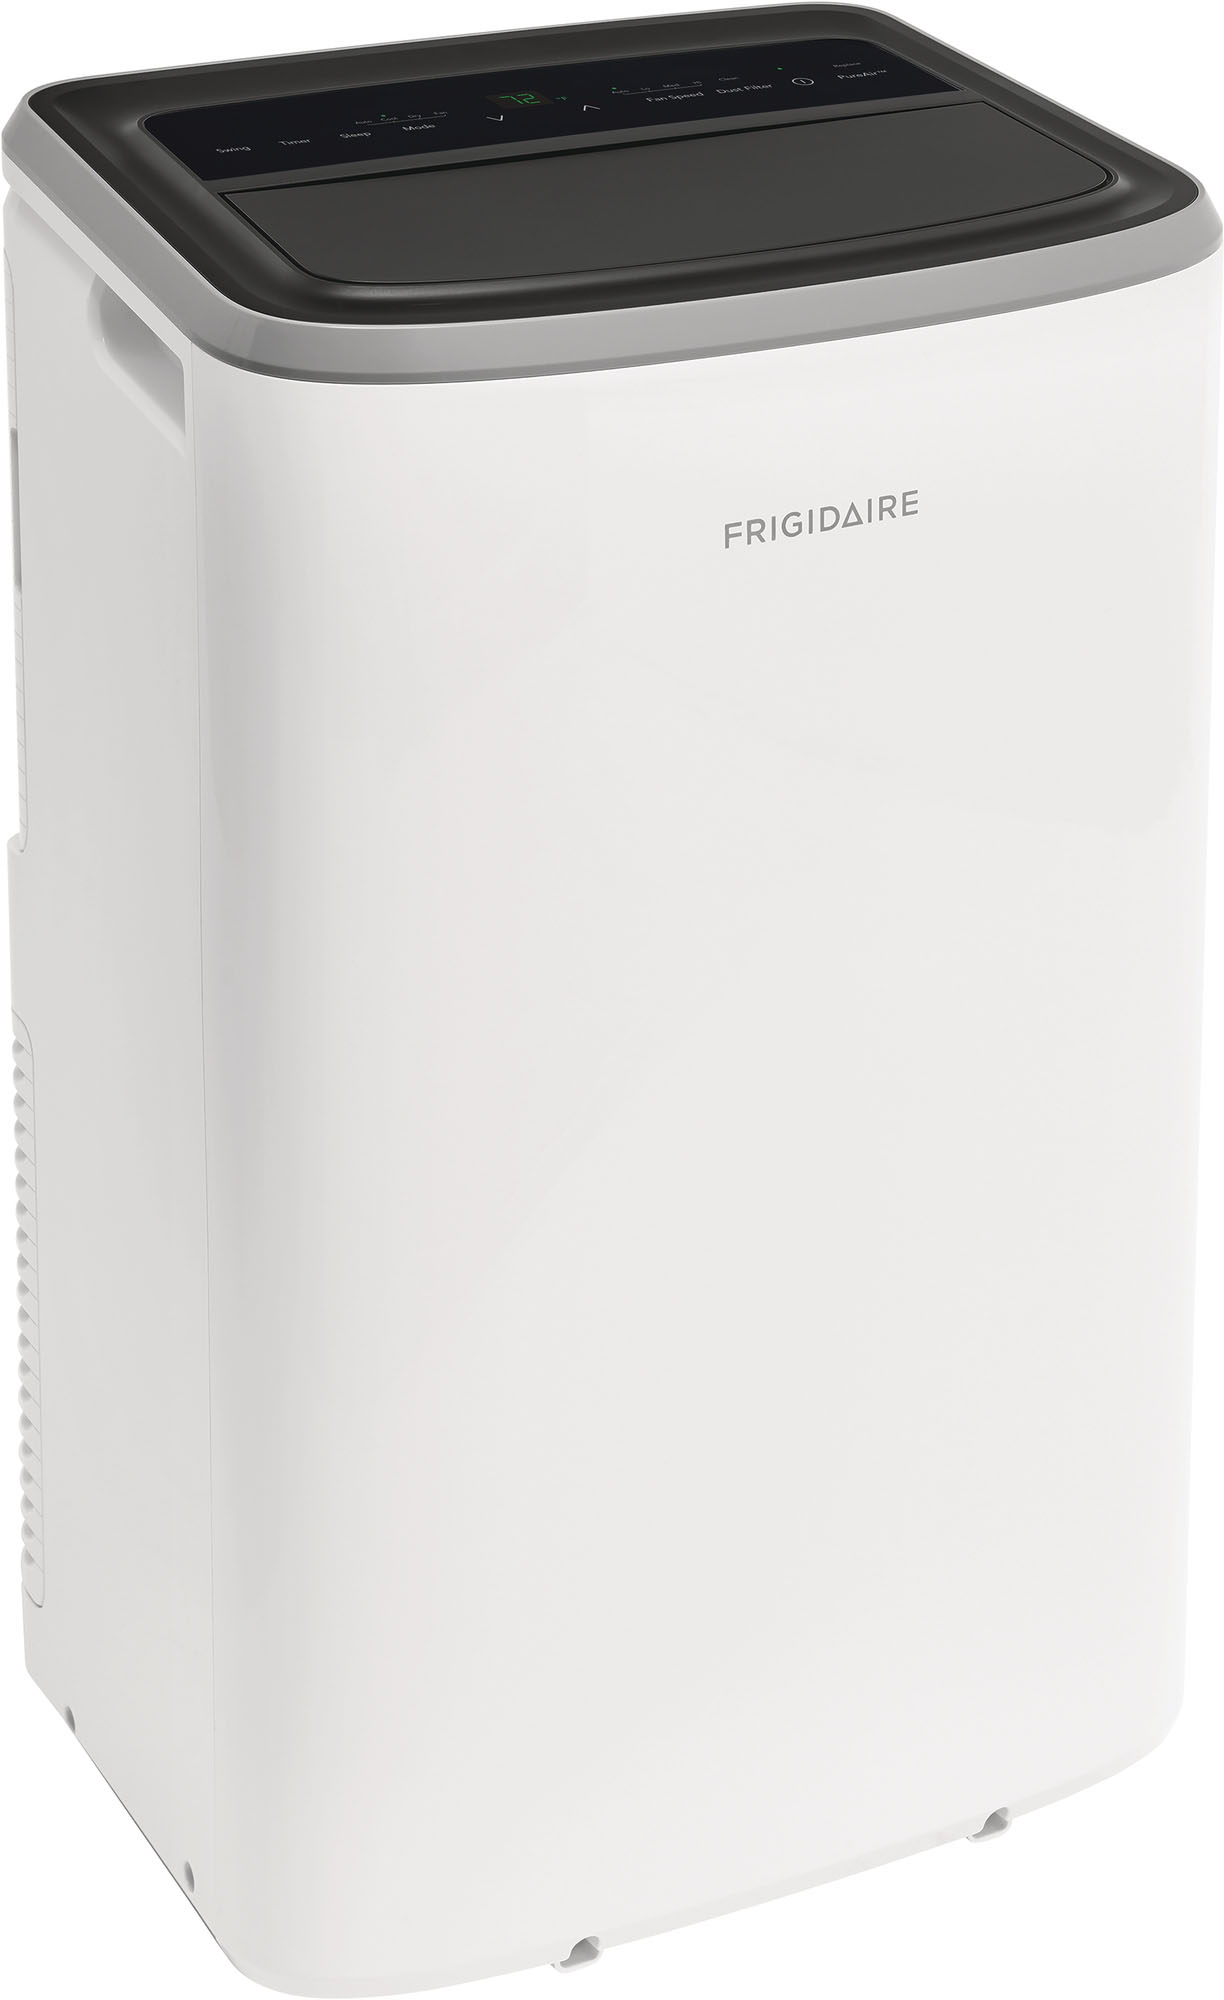 Angle View: Frigidaire - 3-in-1 Portable Room Air Conditioner - White